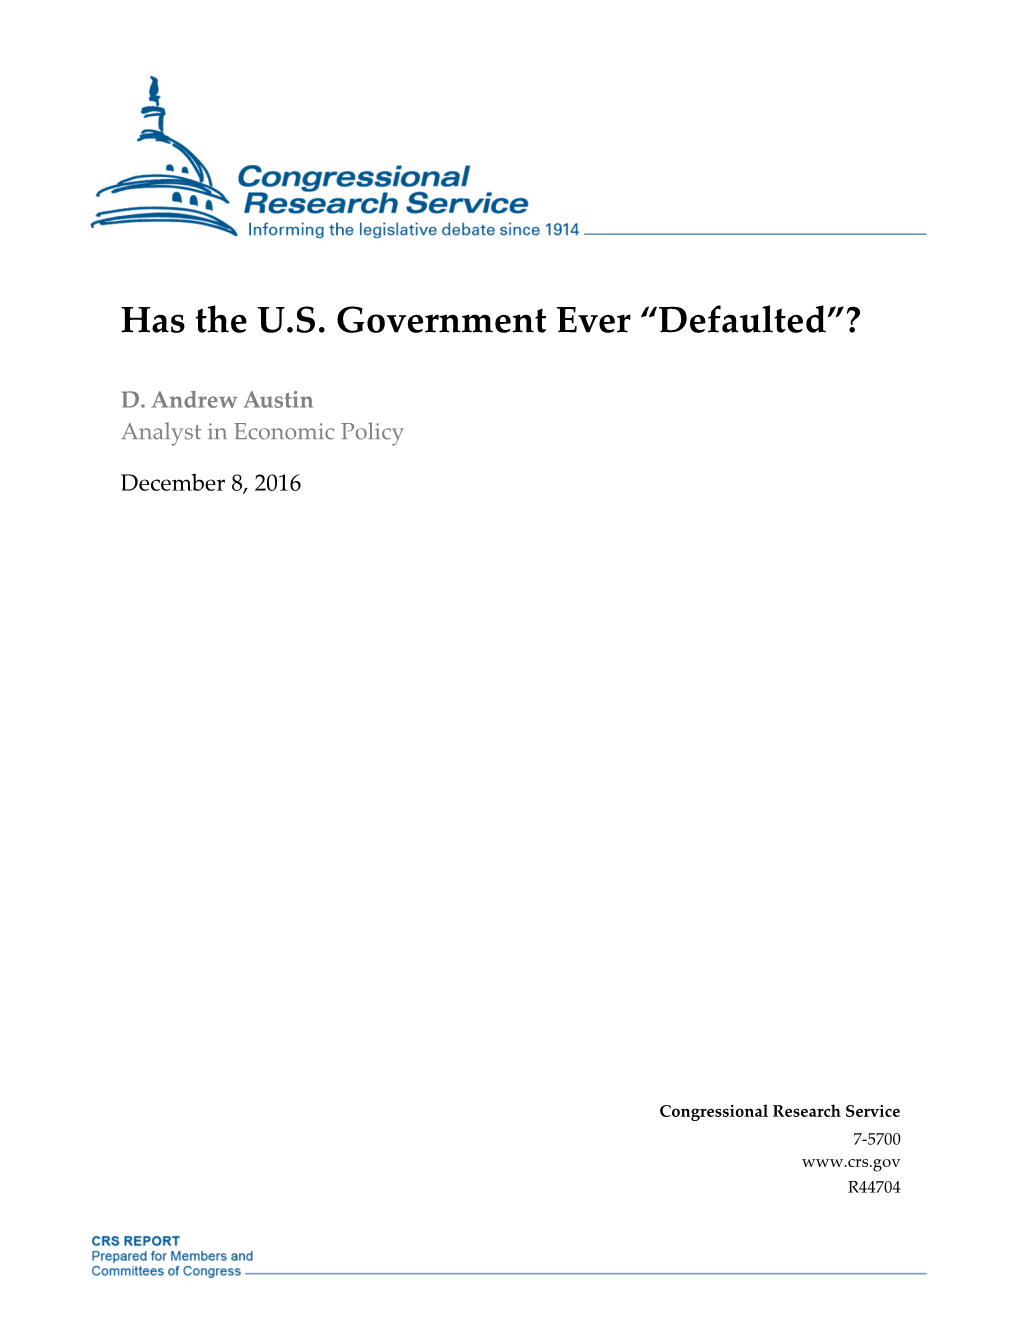 Has the U.S. Government Ever “Defaulted”?